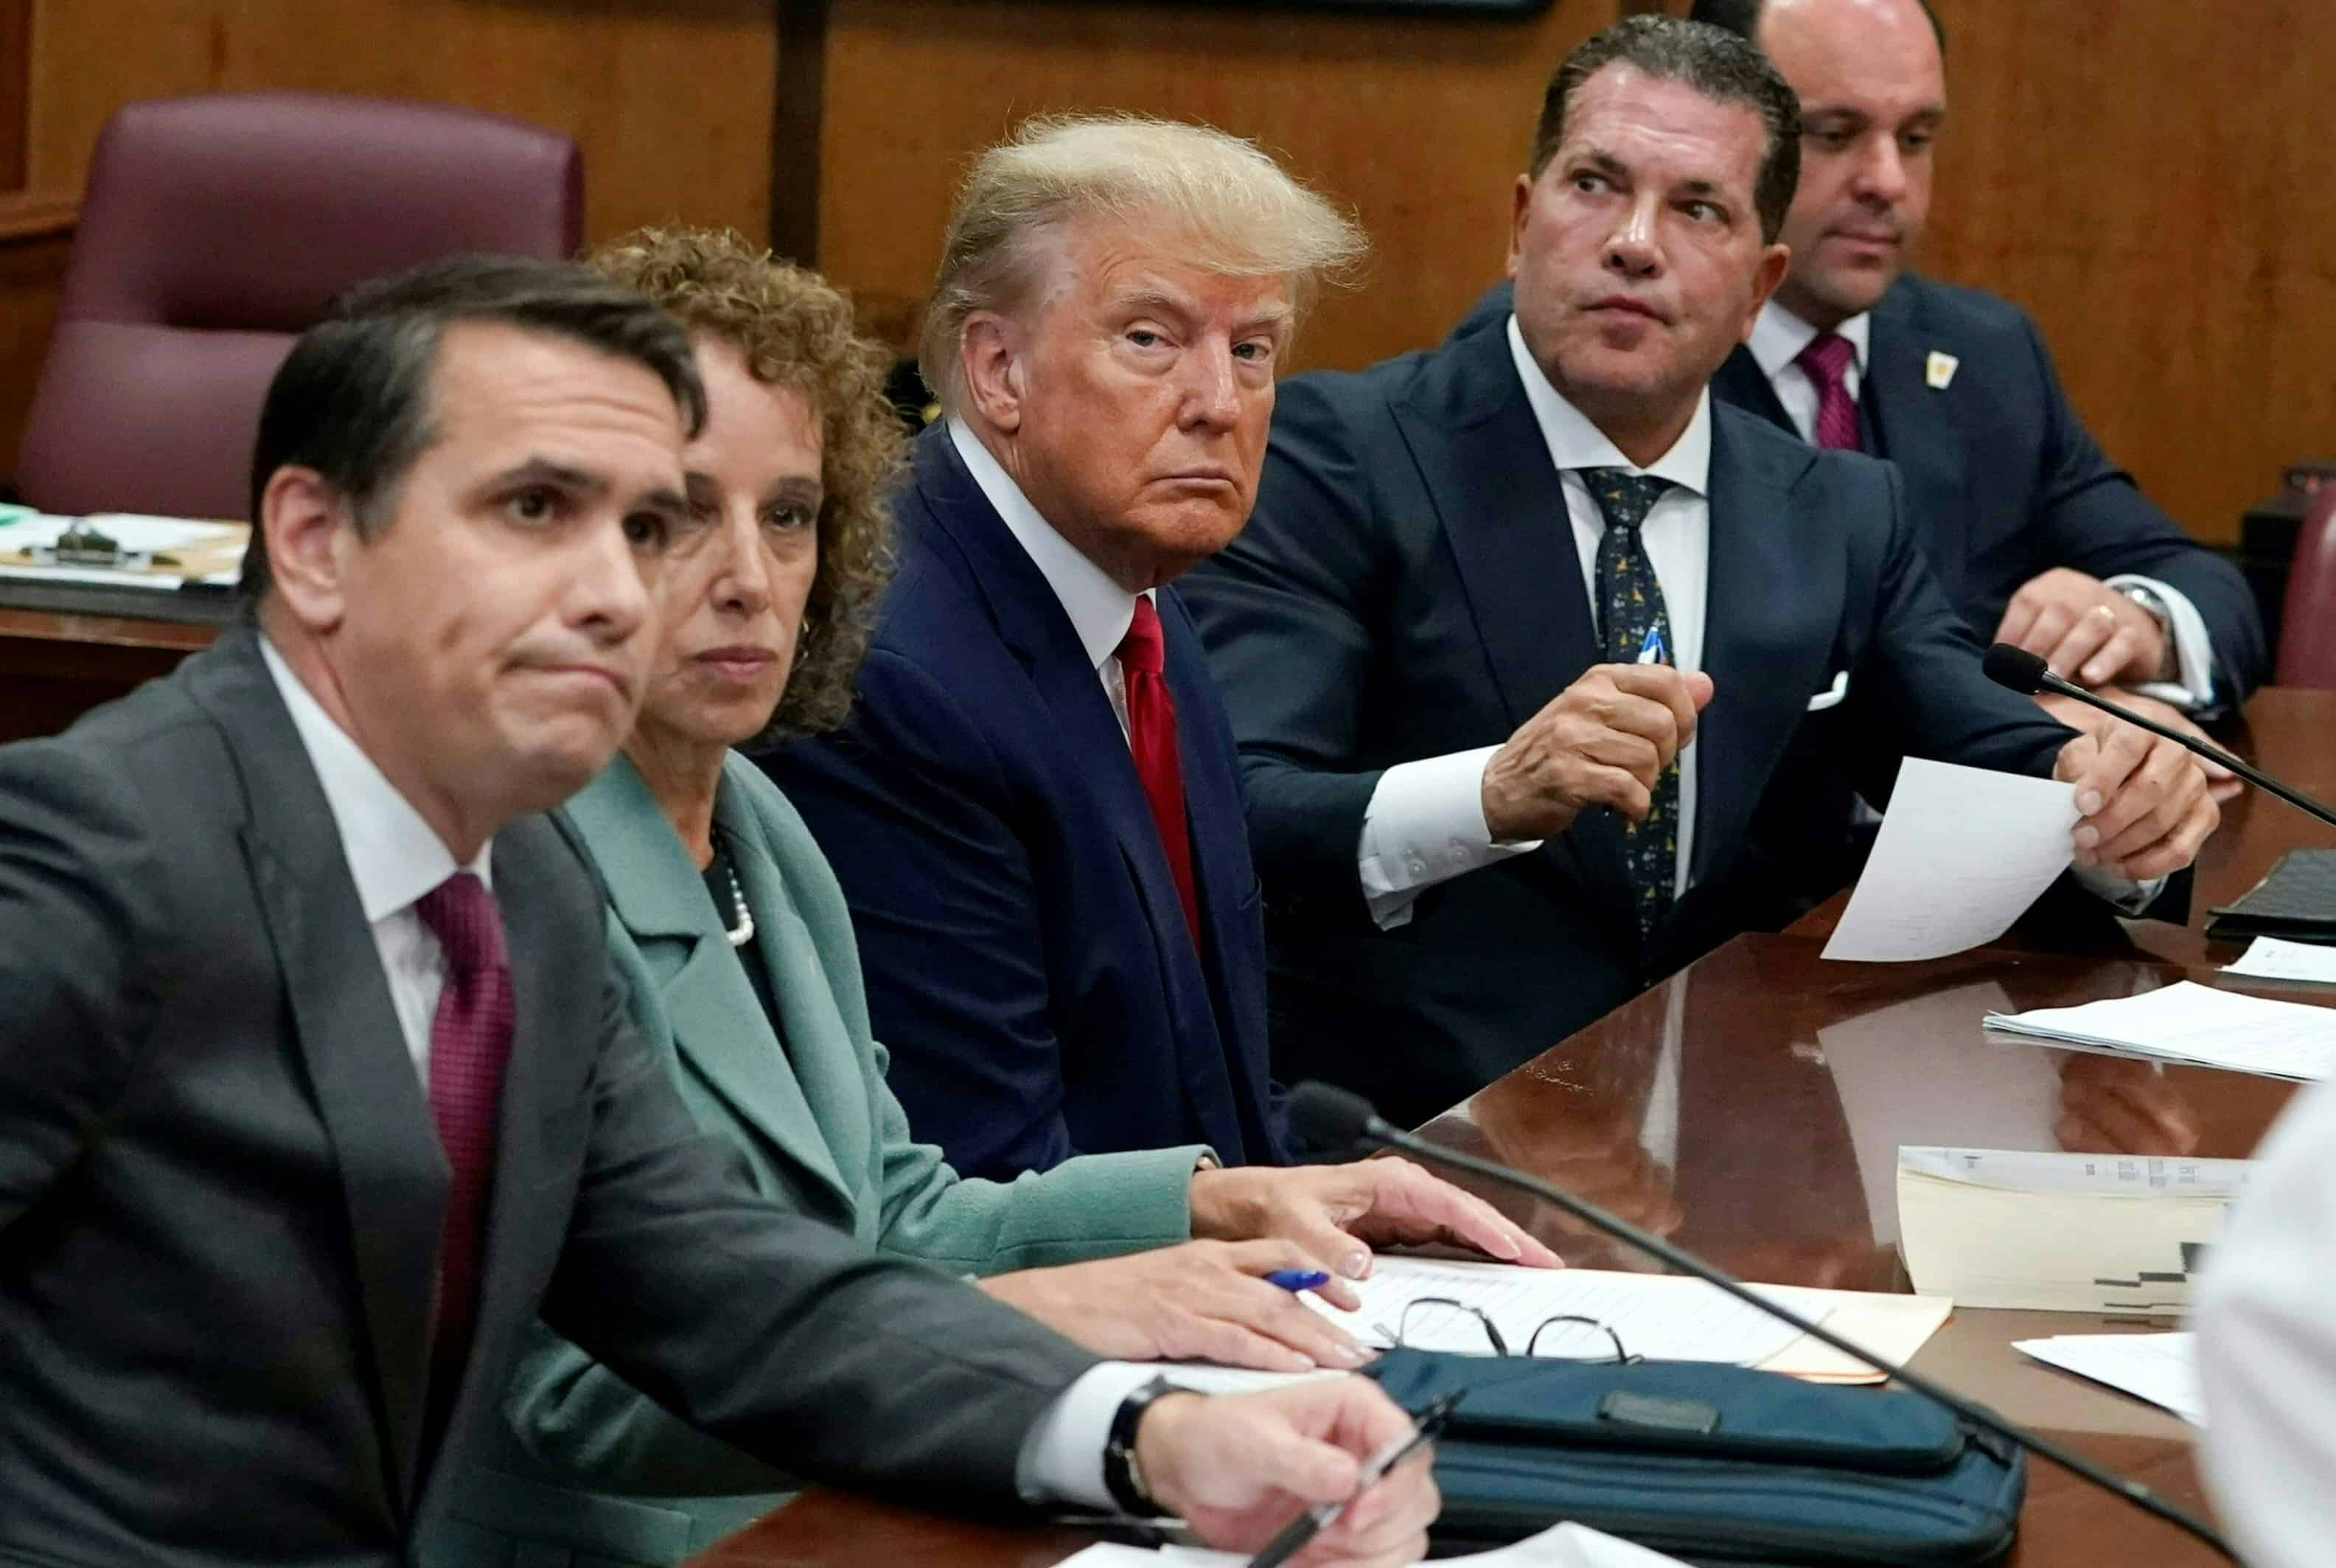 Former US President Donald Trump sits at the defense table with his defense team in a Manhattan court on April 4, 2023 in New York City. - Former US president Donald Trump arrived for a historic court appearance in New York on Tuesday, facing criminal charges that threaten to upend the 2024 White House race. (AFP)